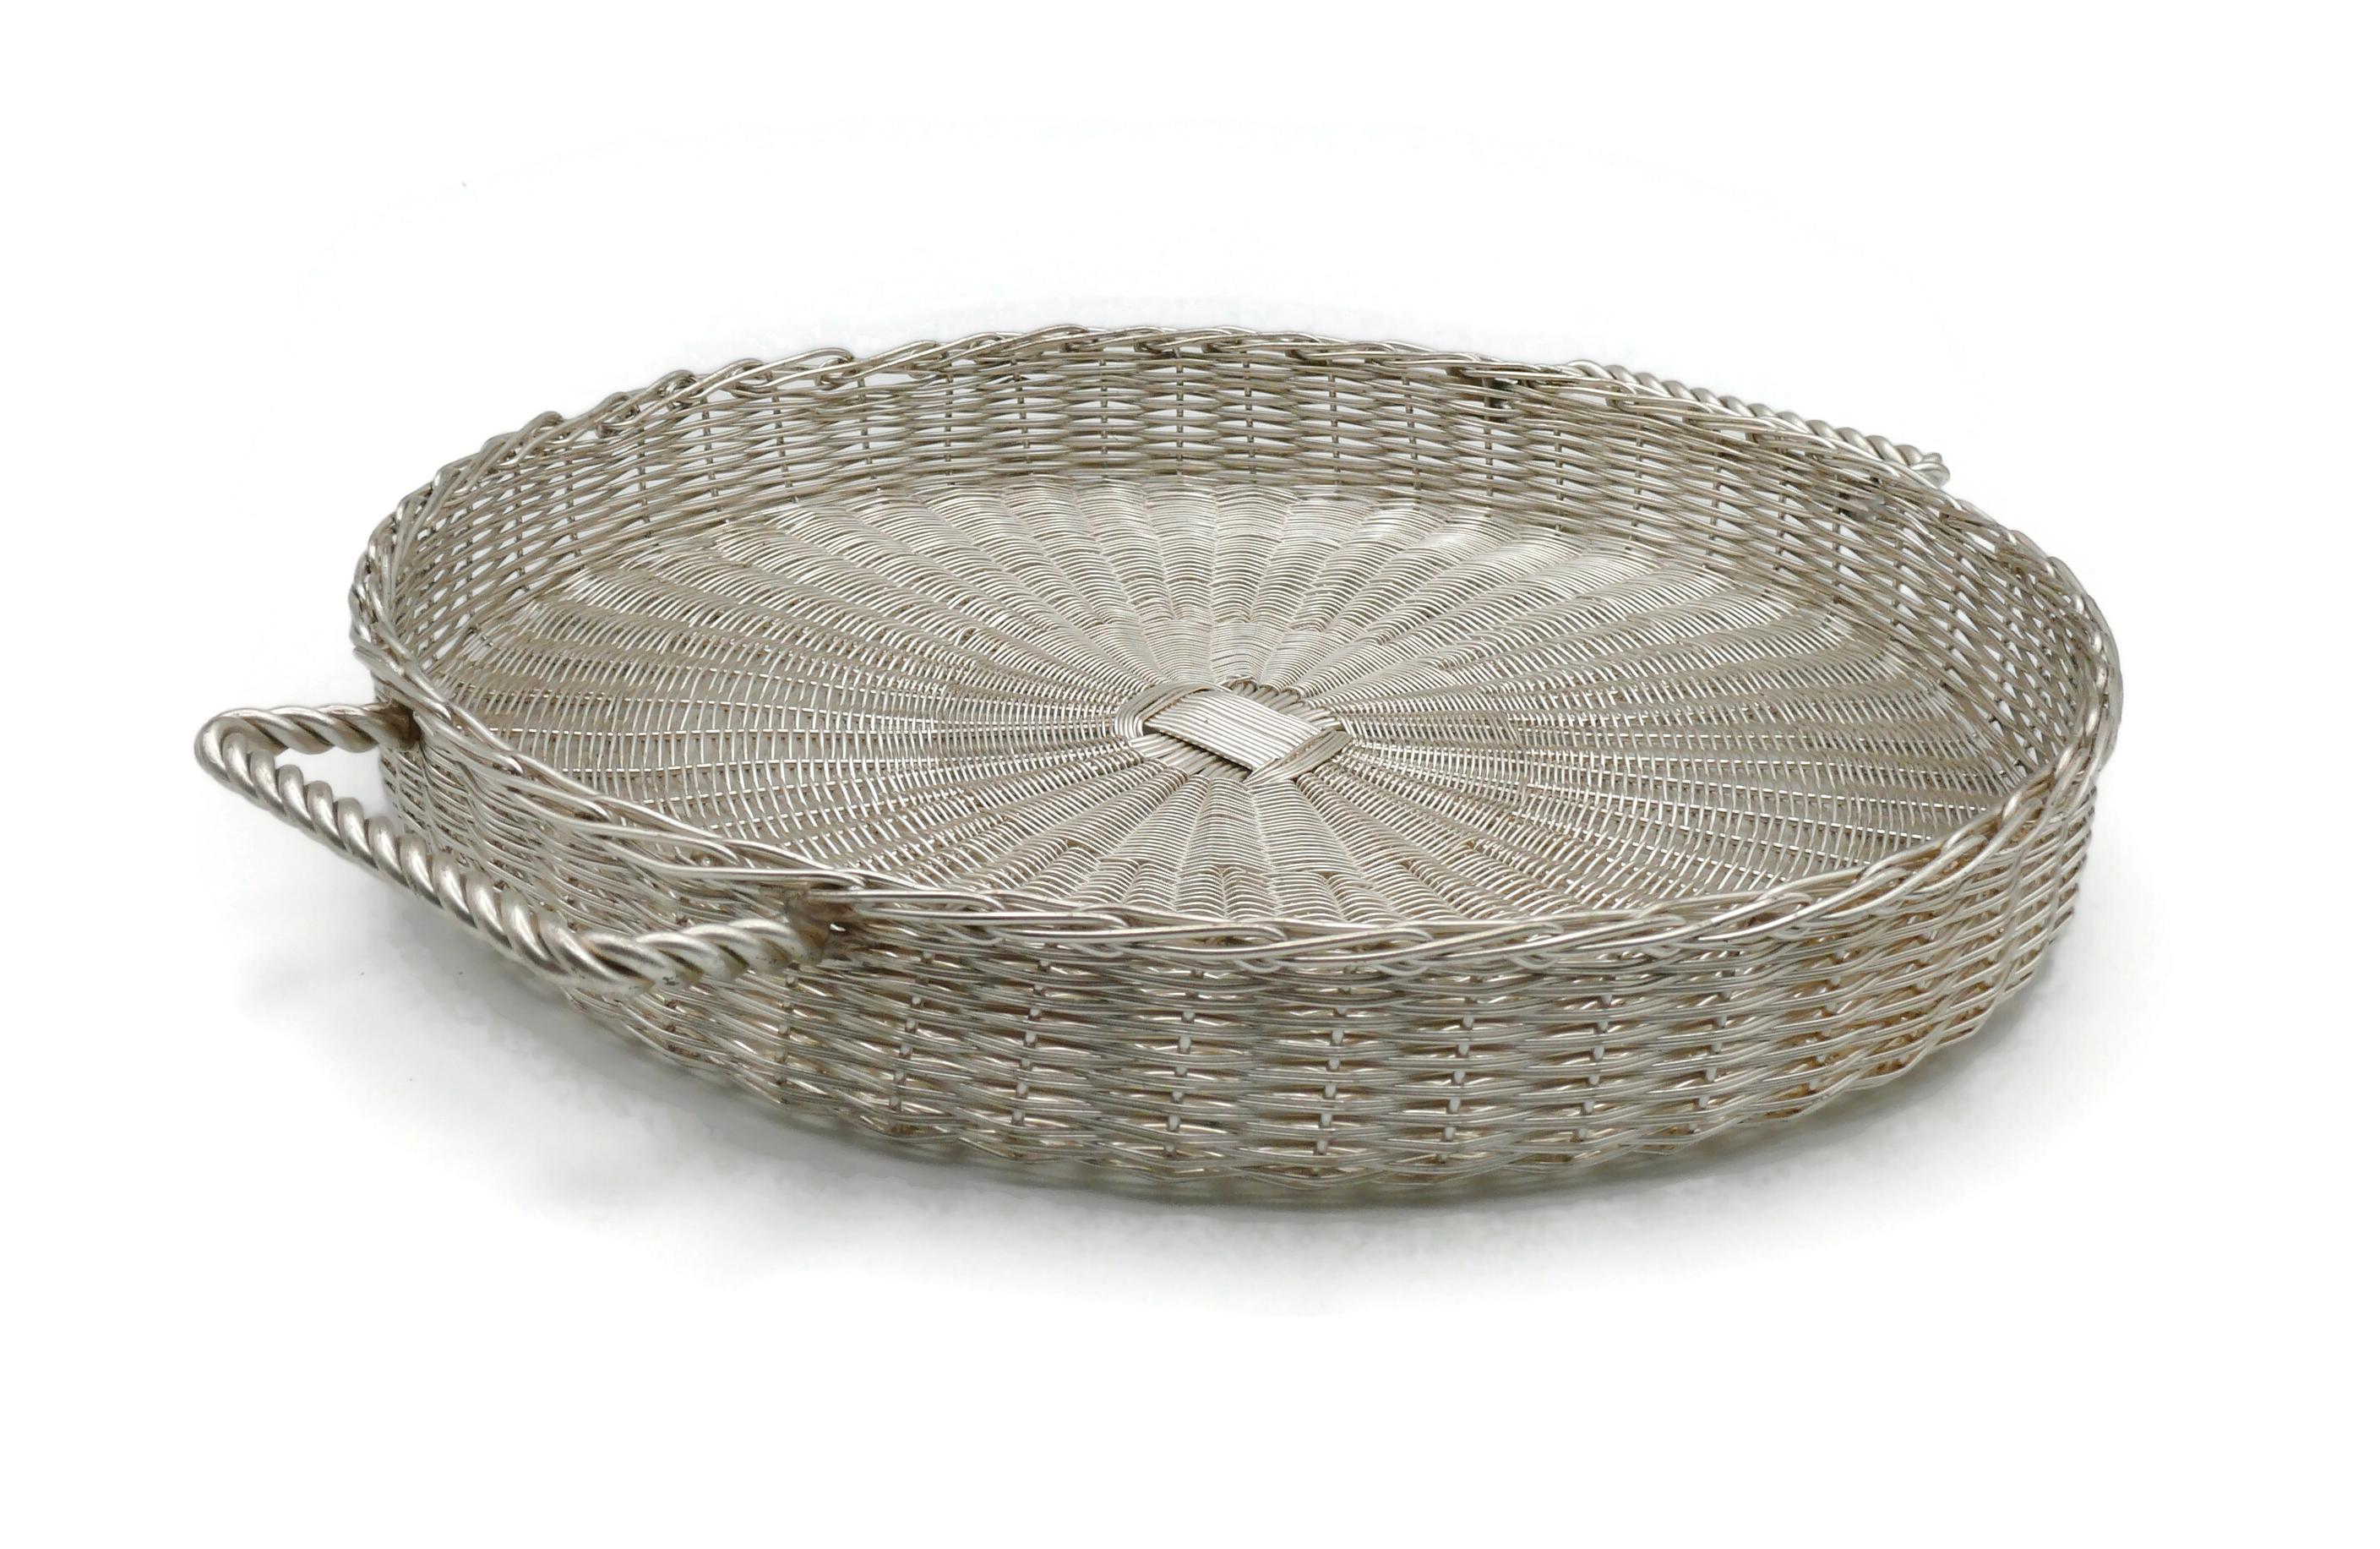 CHRISTIAN DIOR Home Collection Vintage Silver Plated Wicker Style Basket For Sale 1